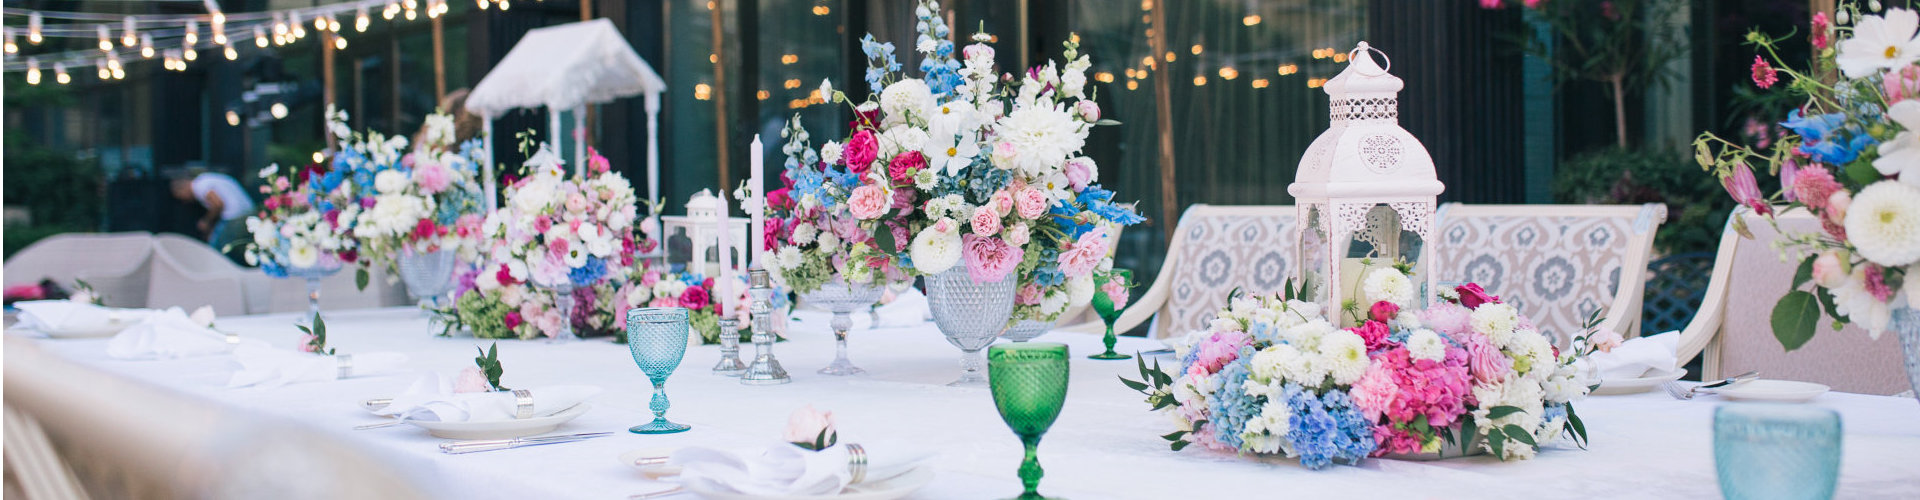 table set with flowers